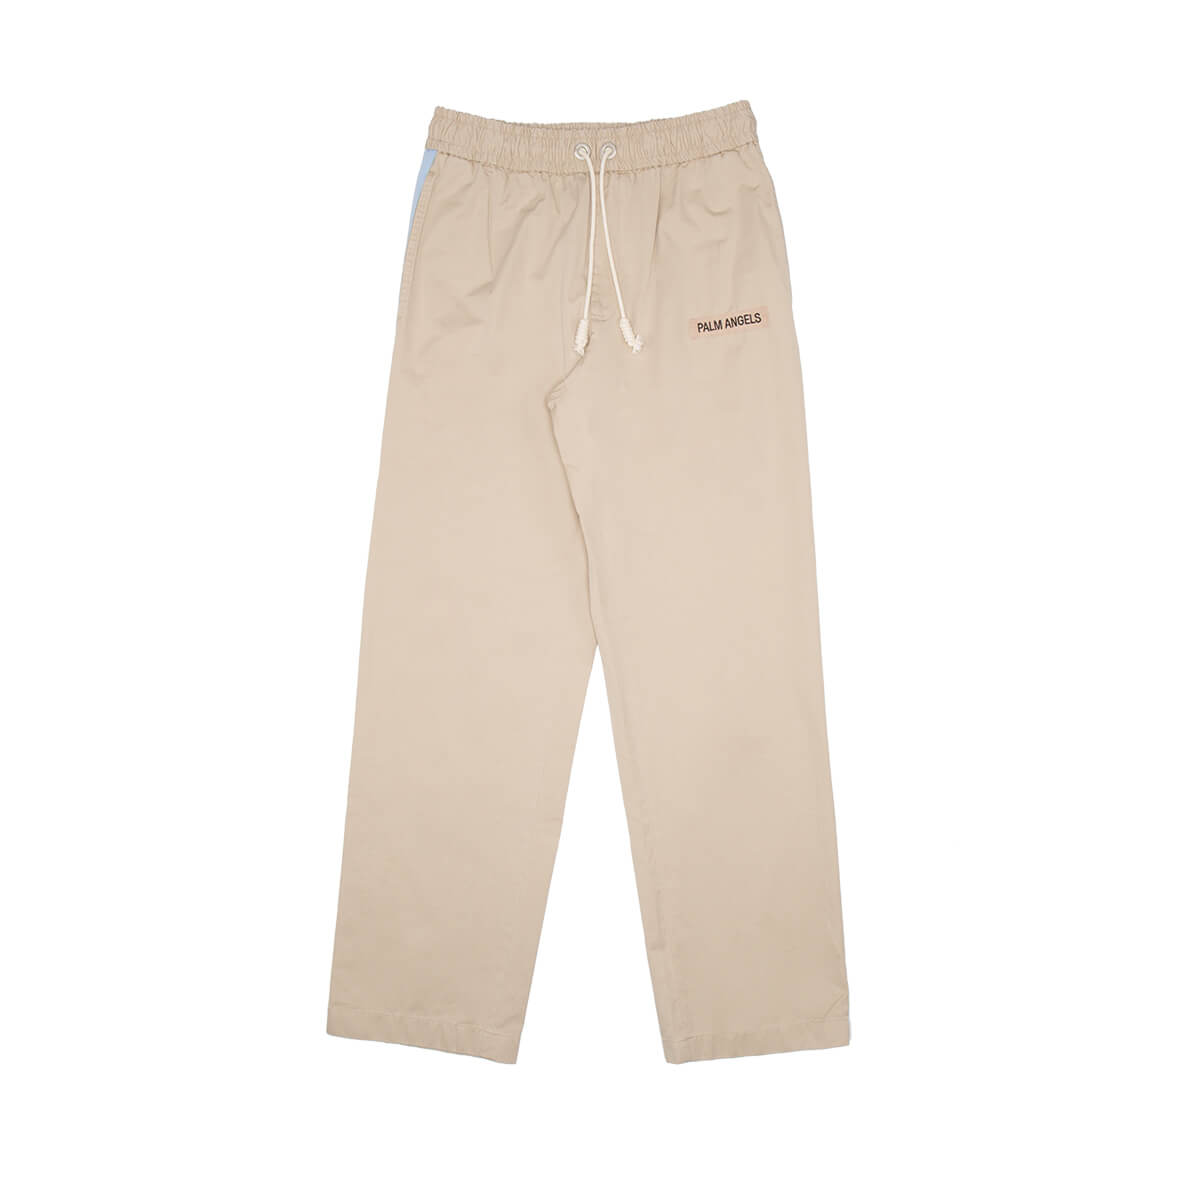 Palm Angels Comfy Pants In Brown